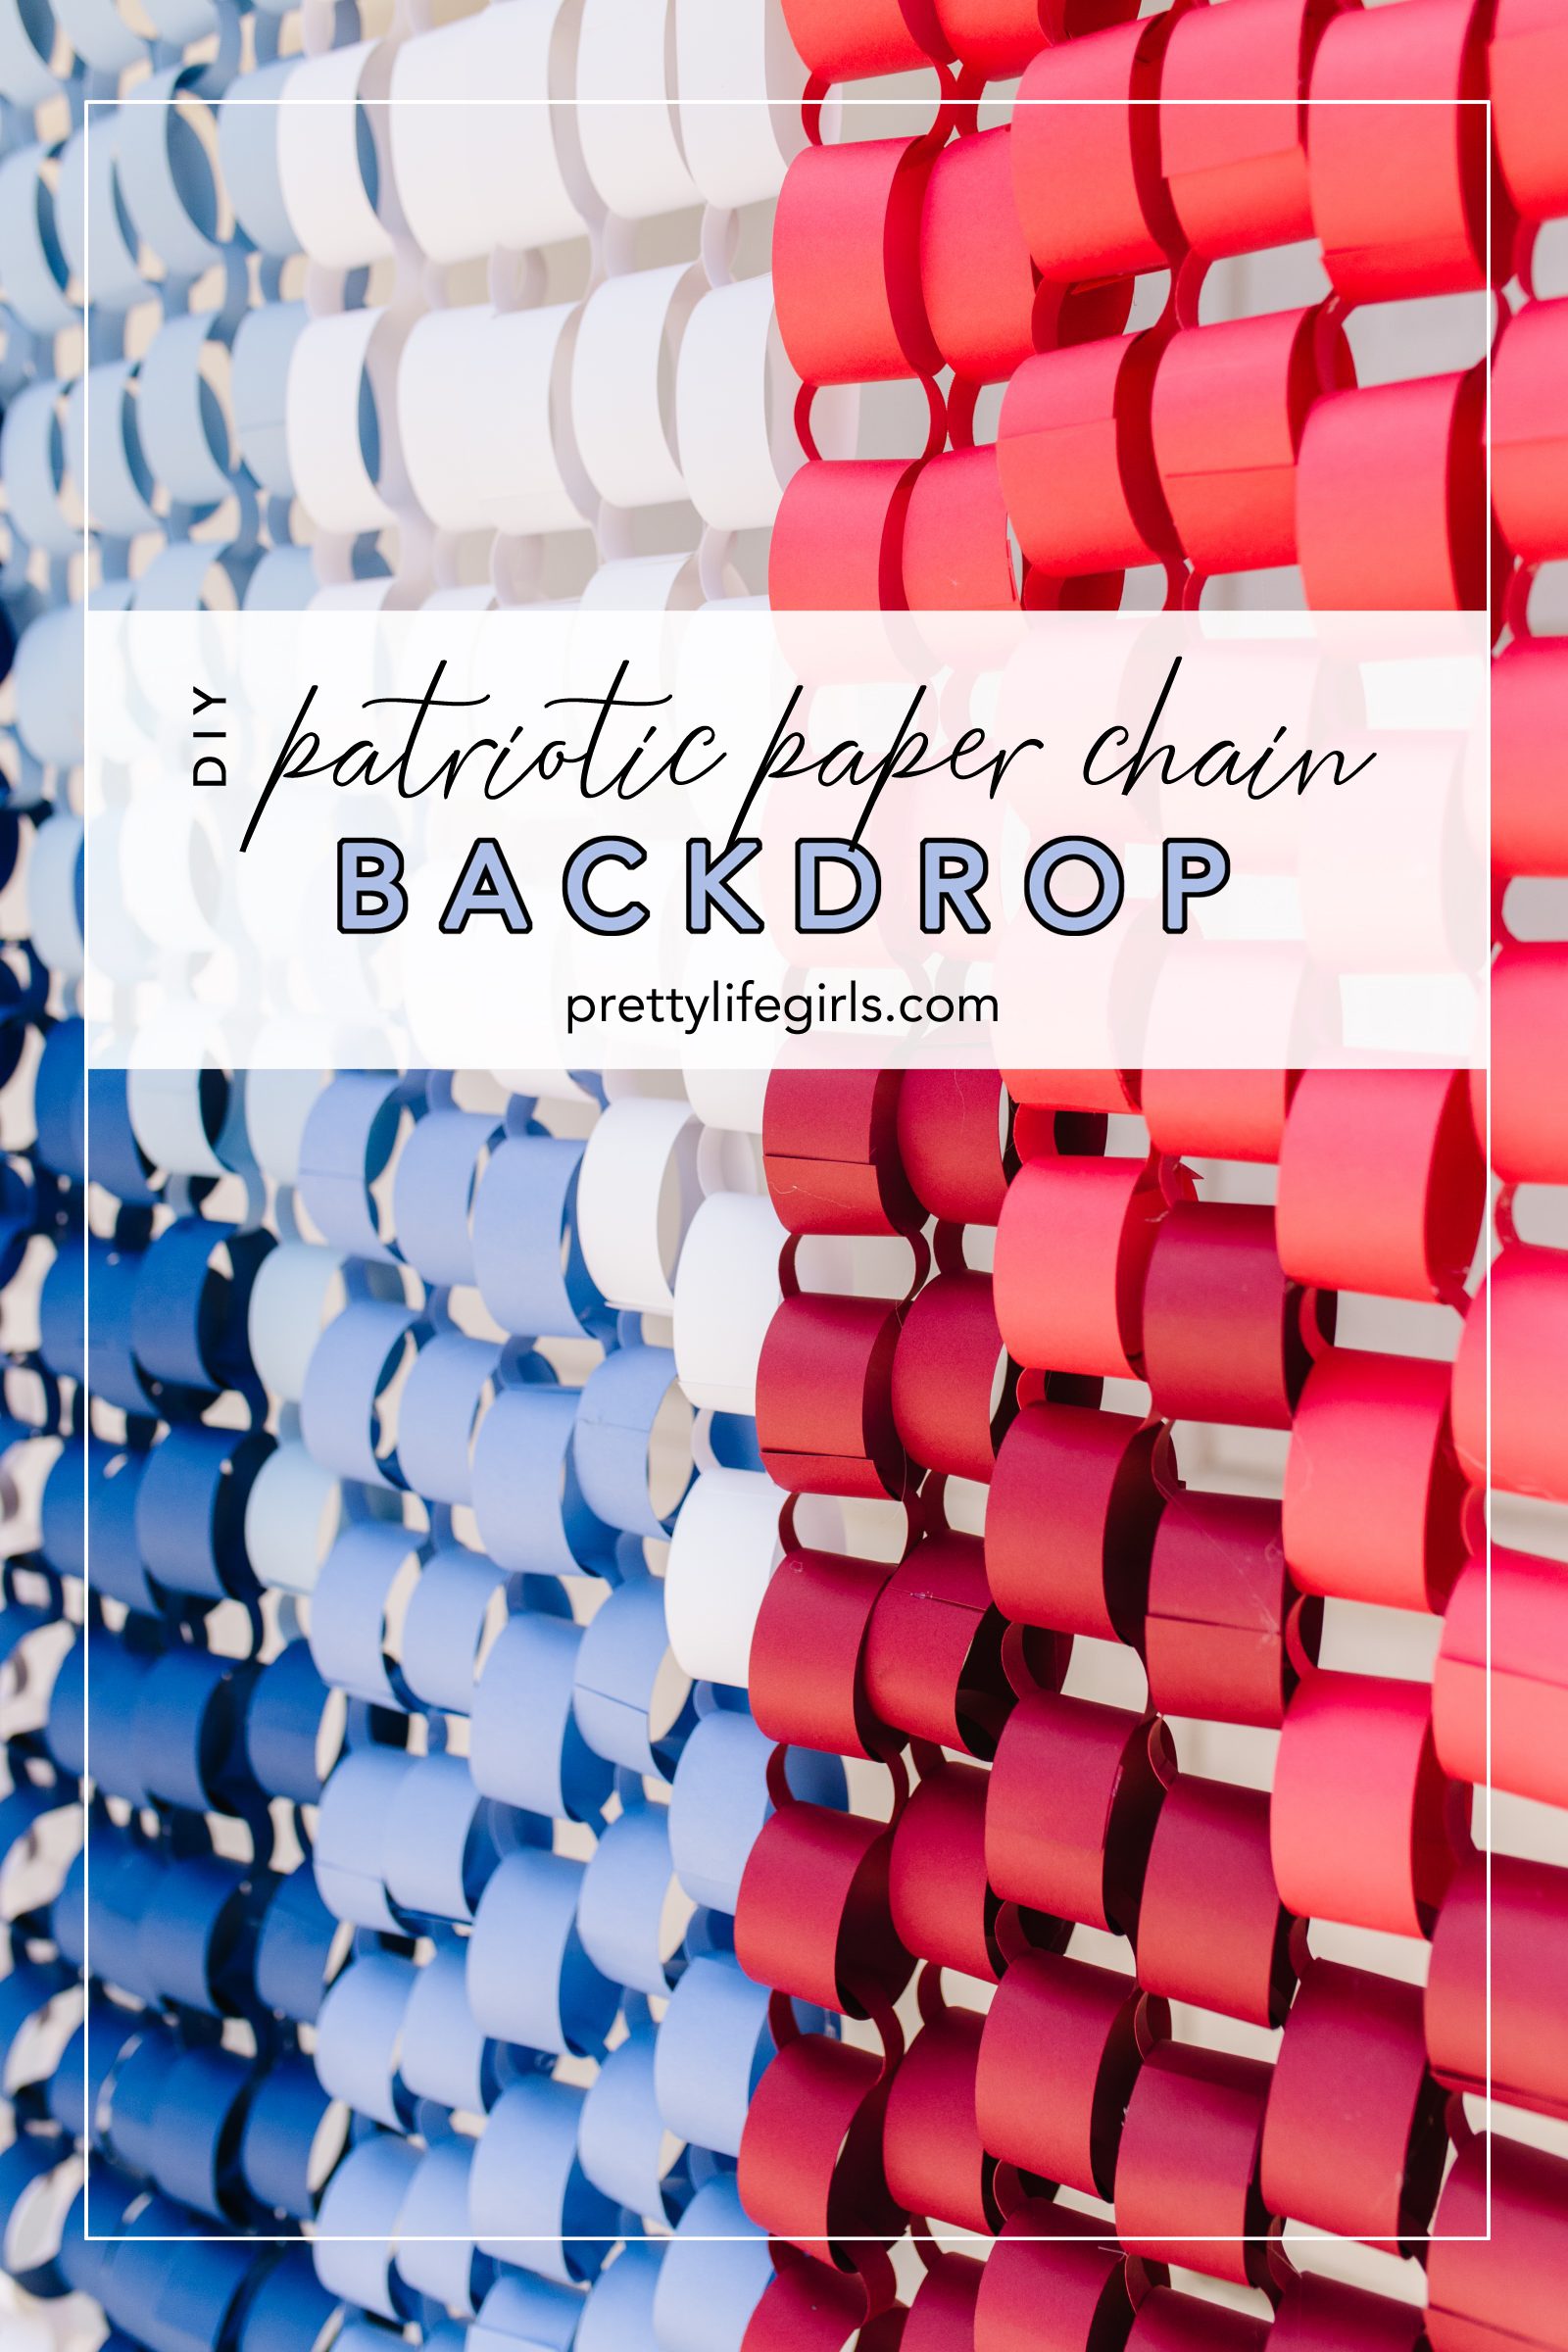 Patriotic Paper Chain Backdrop Tutorial + a tutorial featured by Top US Craft Blog + The Pretty Life Girls